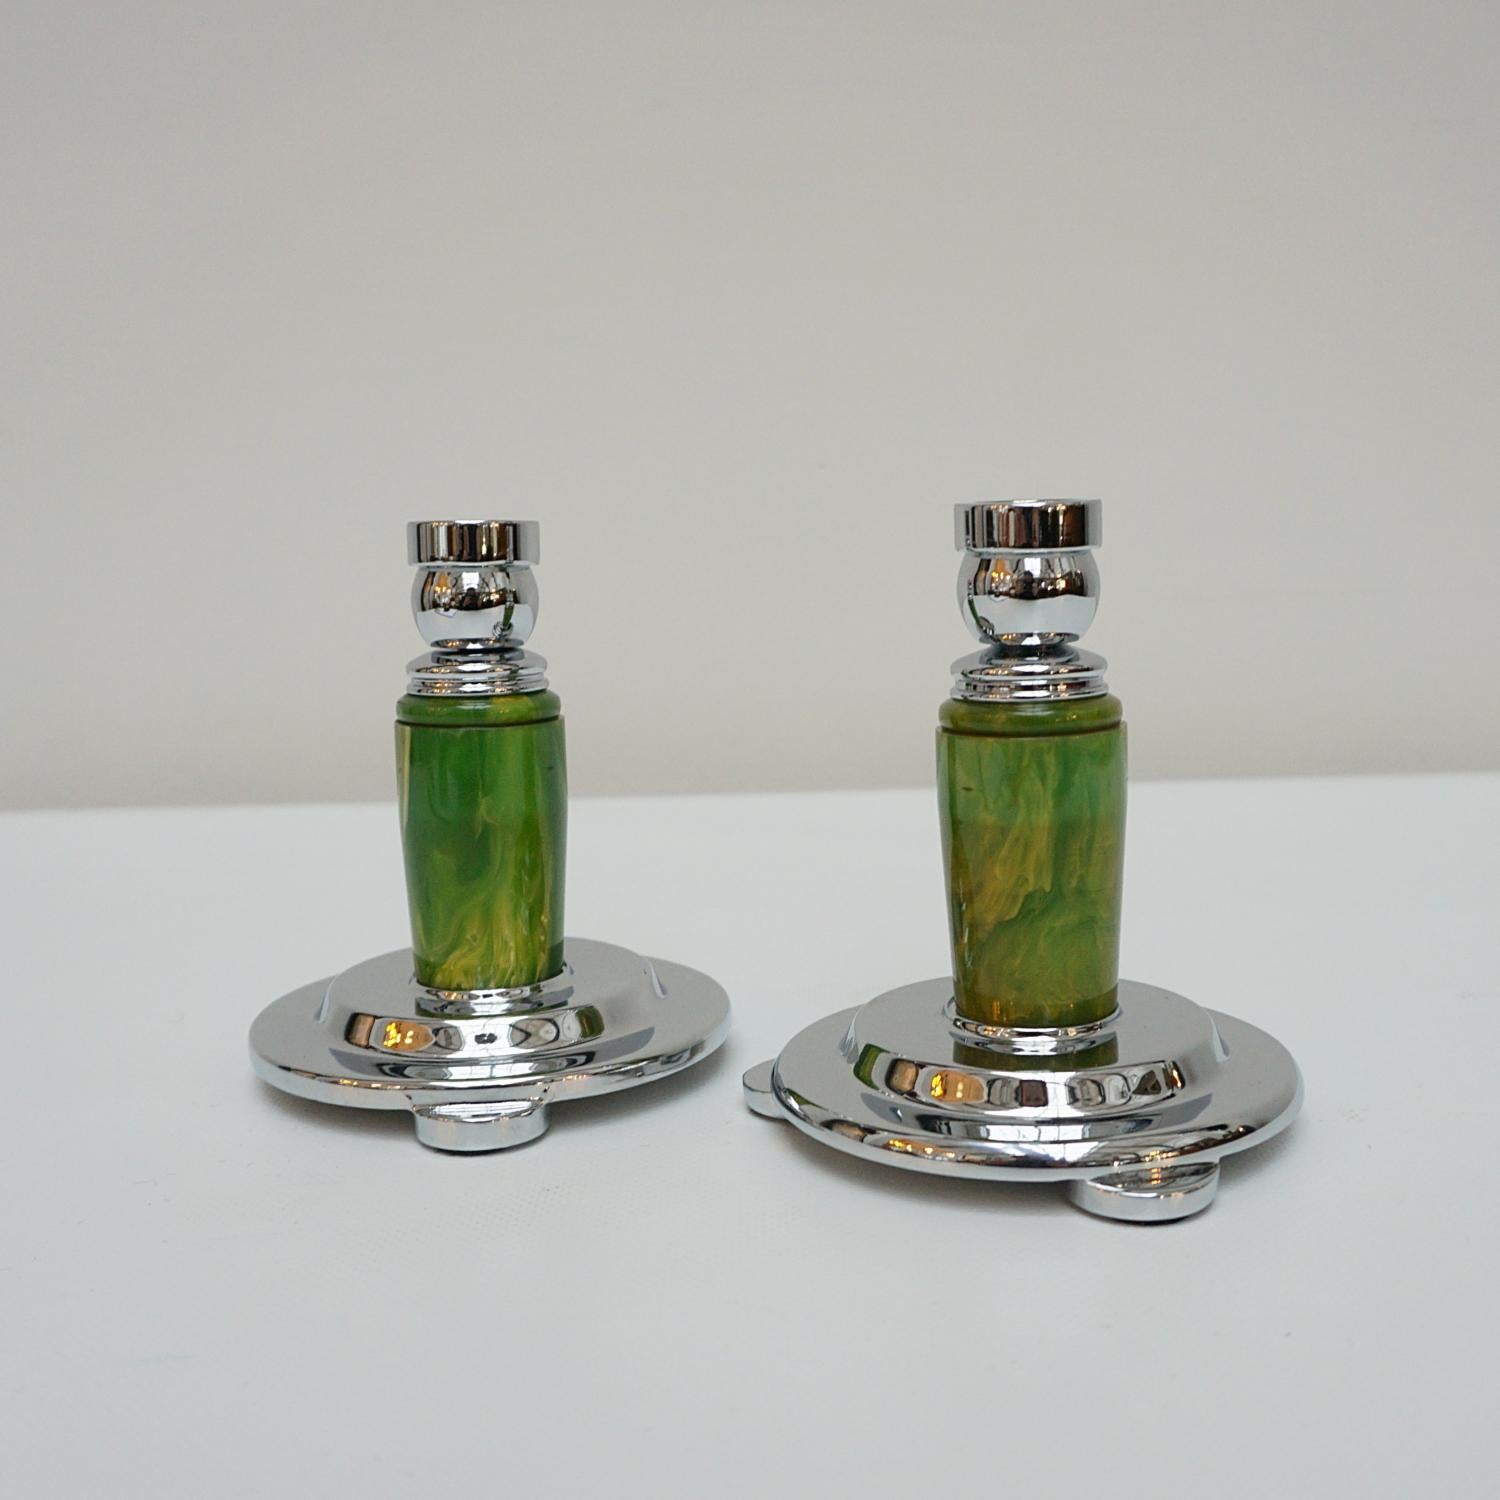 A pair of Art Deco candlesticks. Marbled greed rounded bakelite stem. Set over a rounded, stepped chromed metal base with chromed metal top. 

Dimensions: H 13cm W 11.5cm

Origin: English

Date: Circa 1935

Item Number: 2710233

Re-chromed and